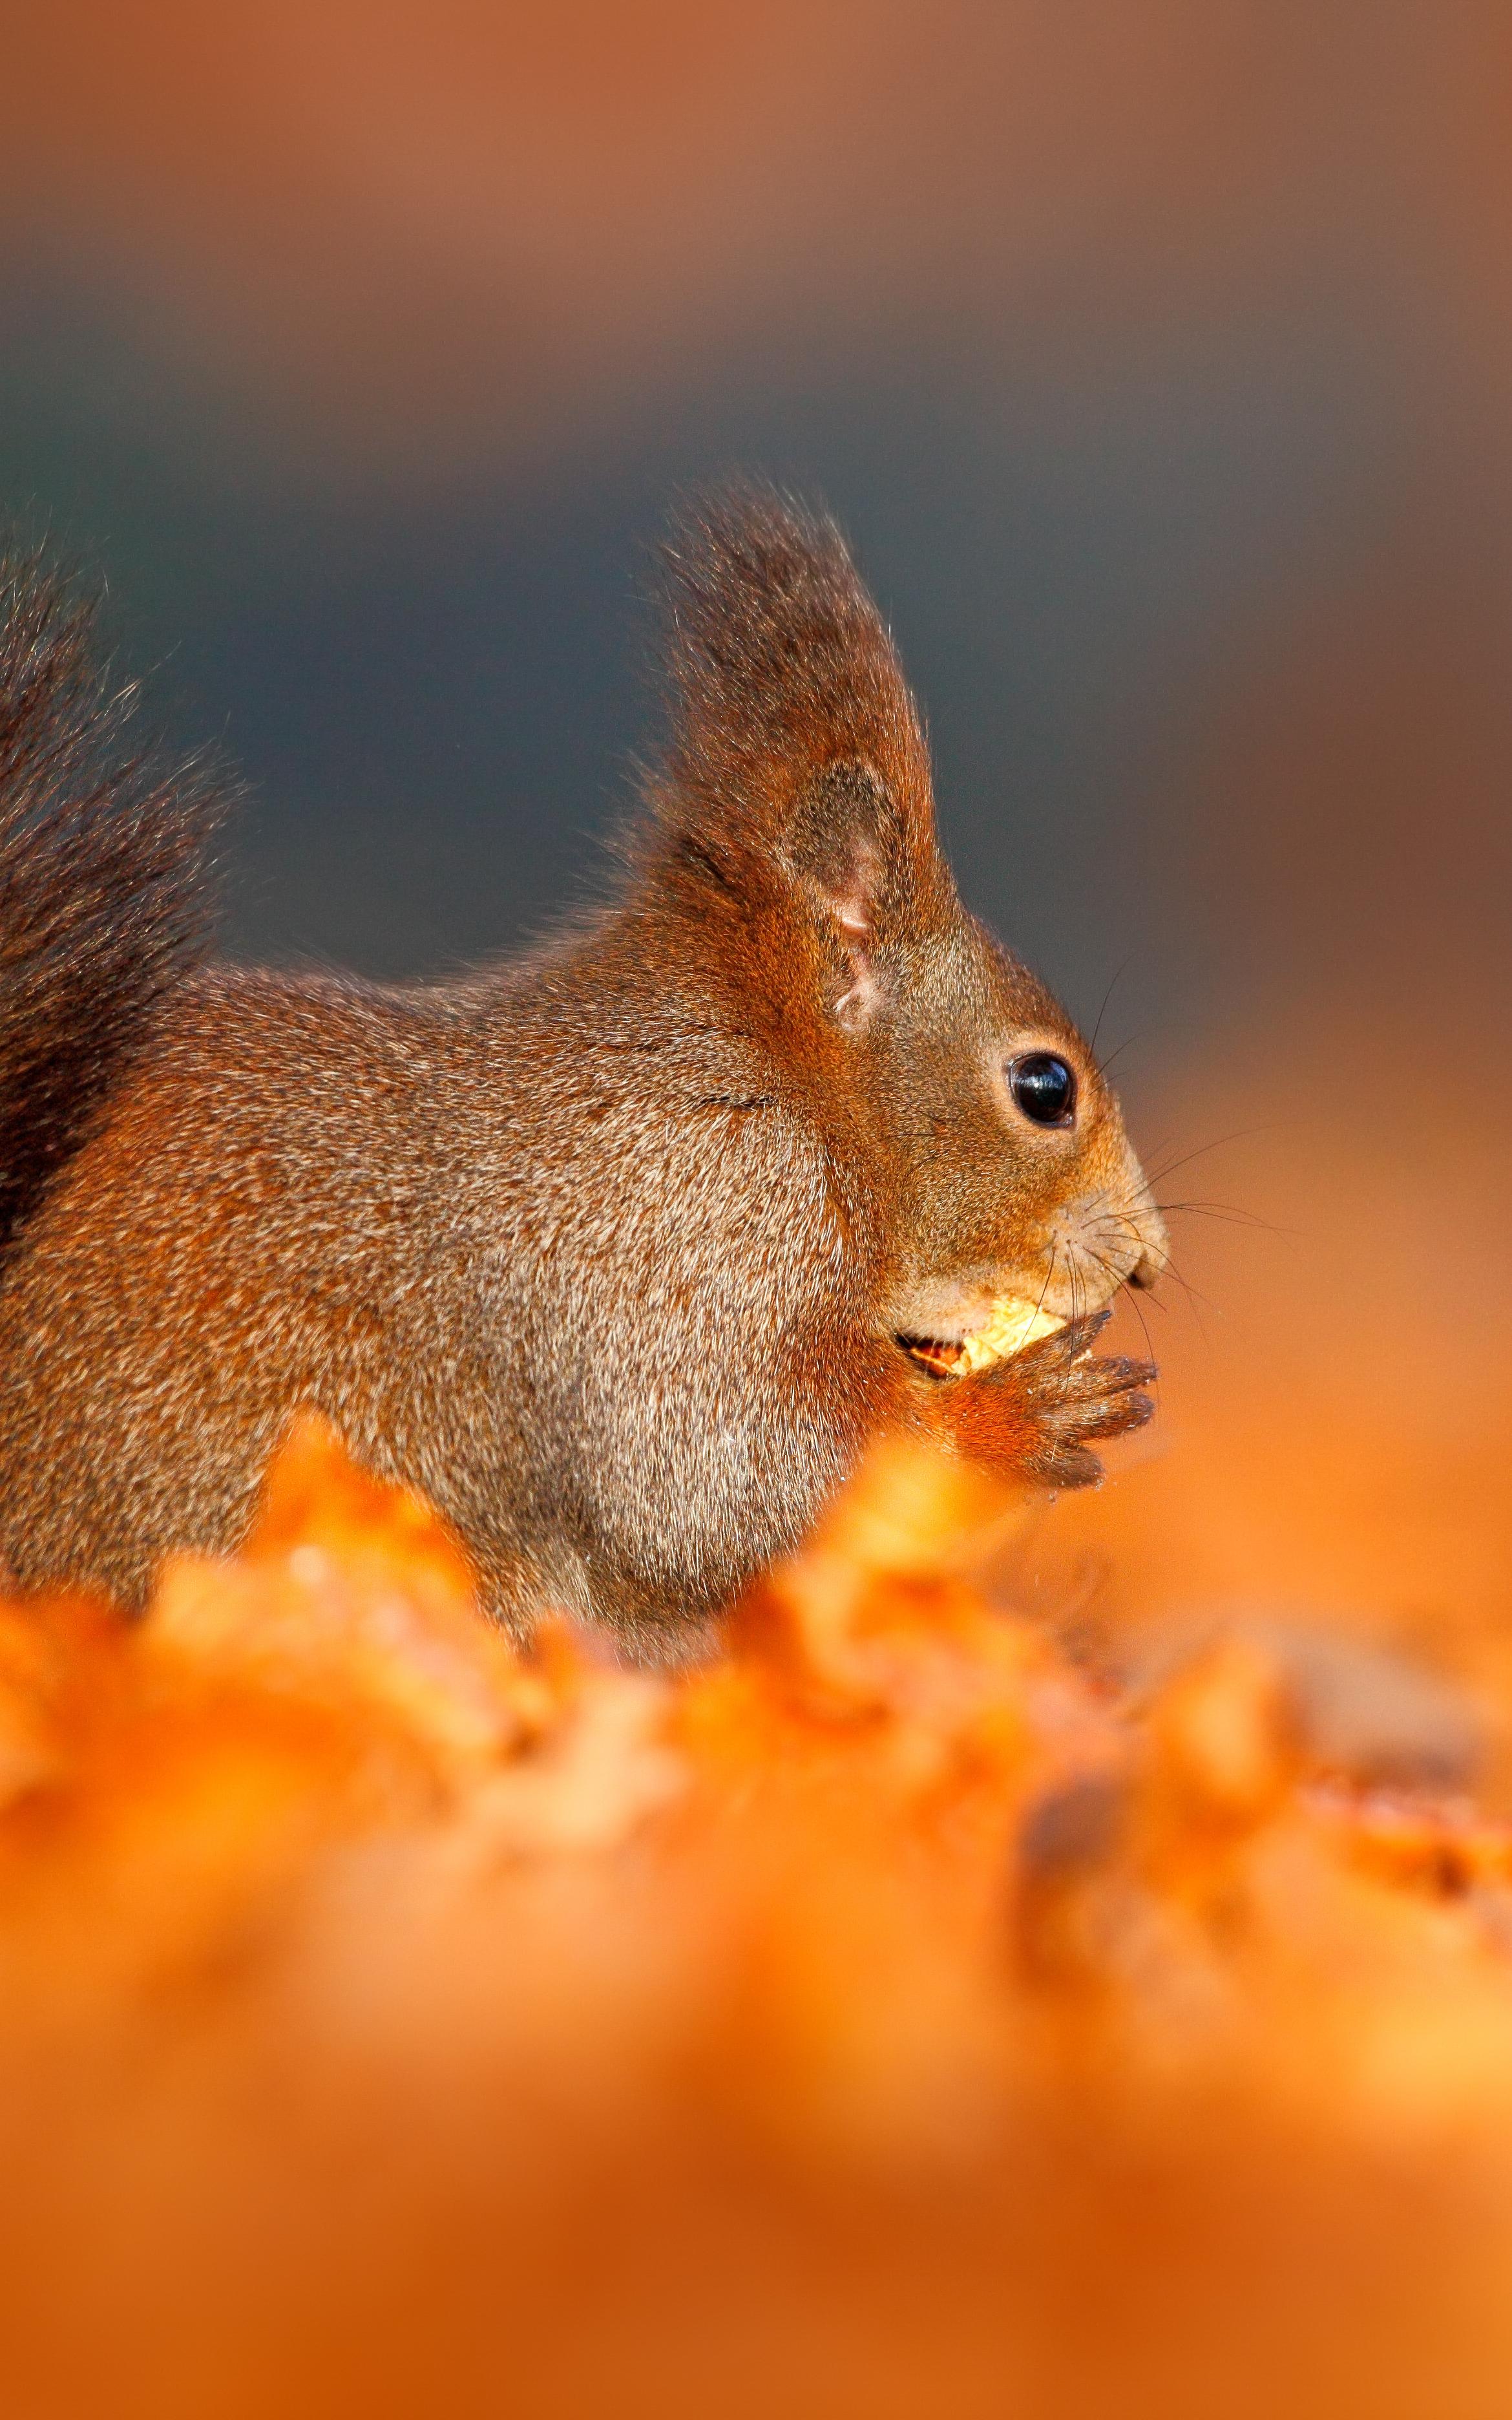 Beautiful News - Squirrel sitting in brown leaves on the ground eating a nut